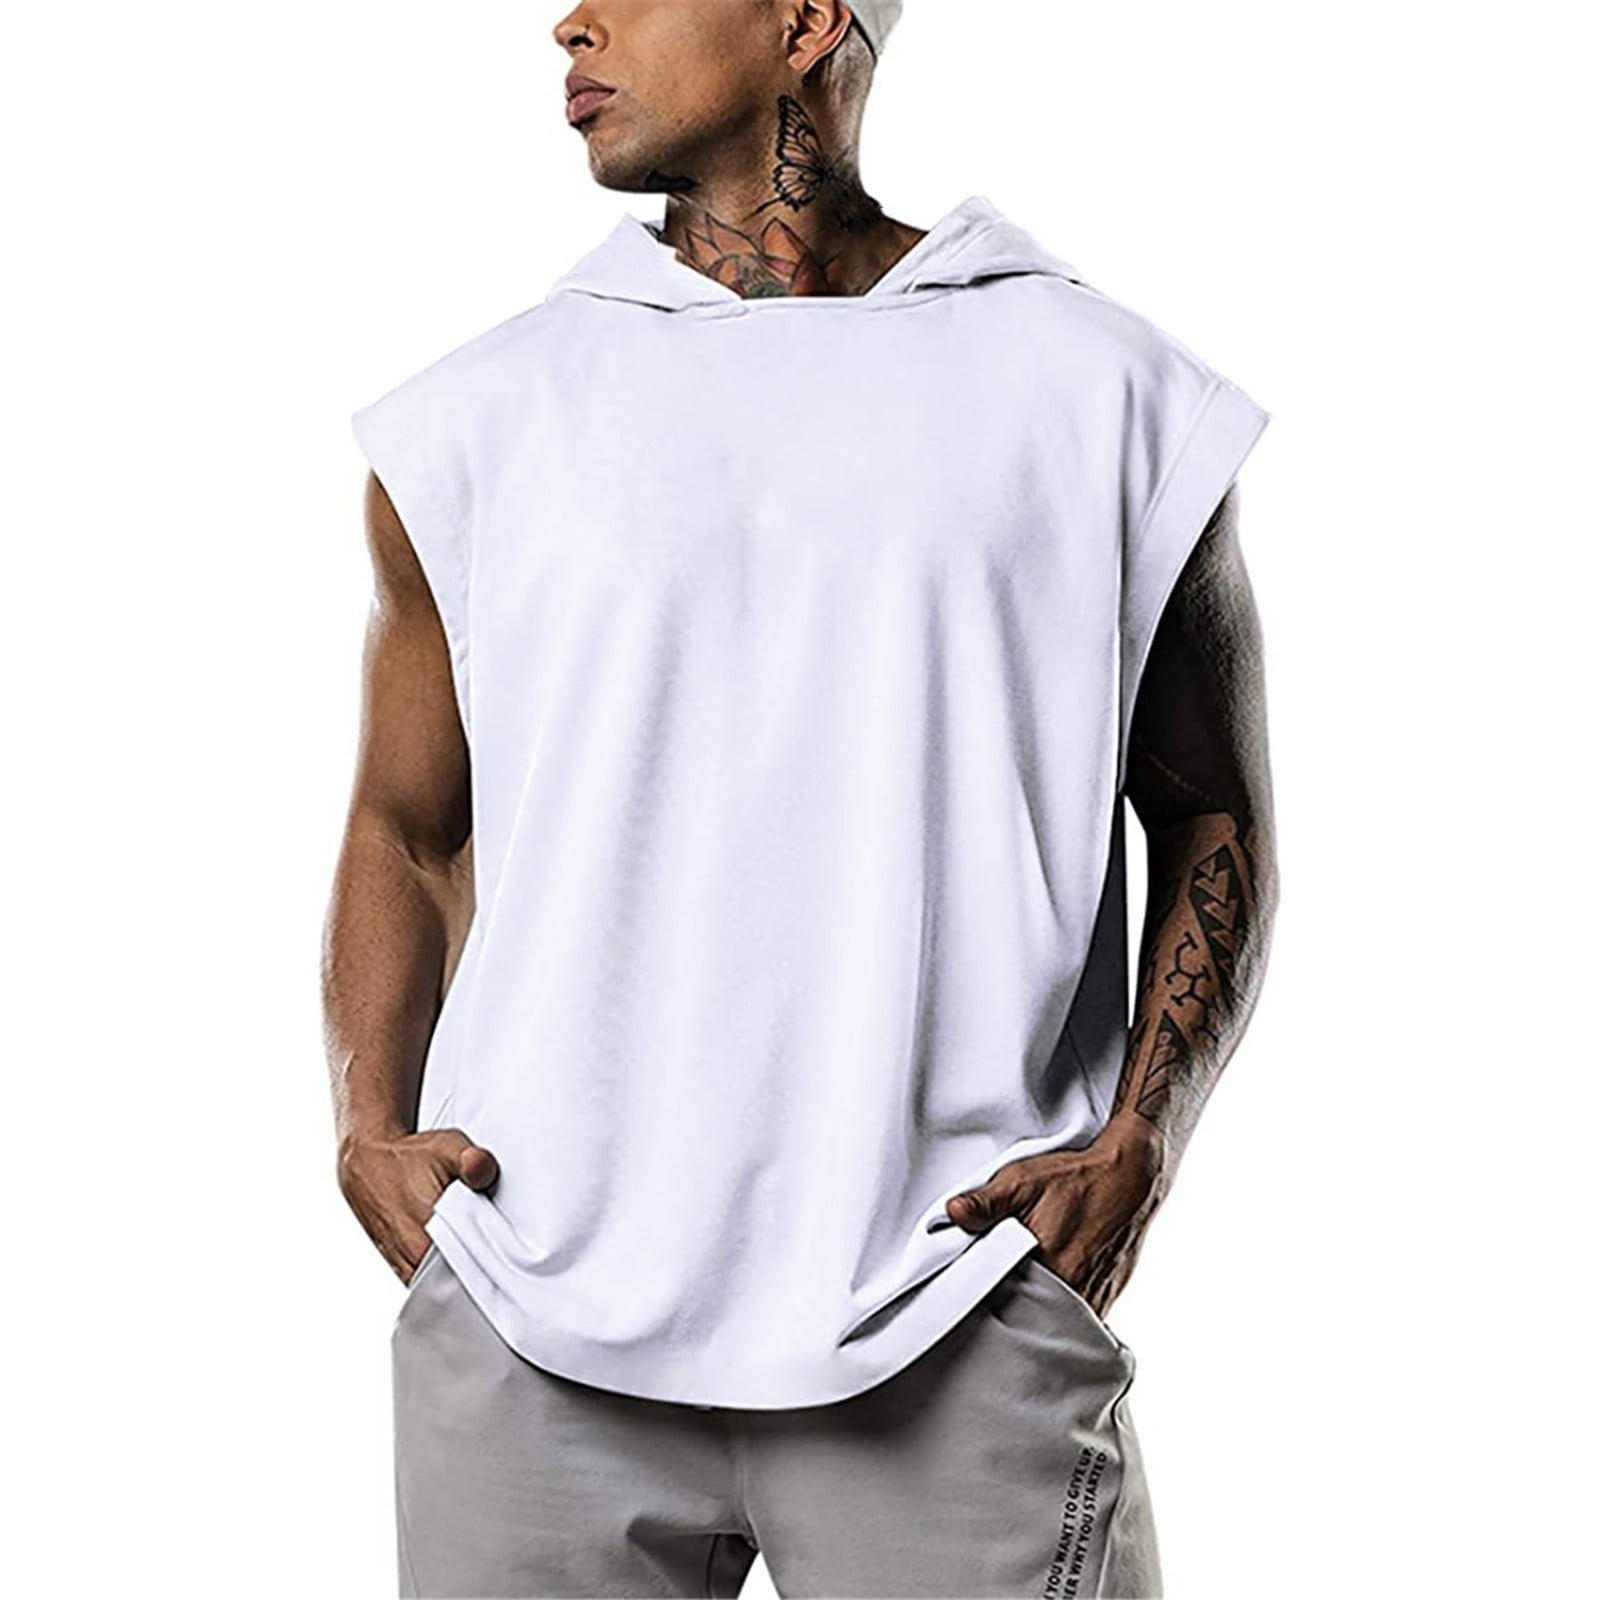 TOWED22 Sleeveless Shirts for Men,Men's Drop Shoulder Workout Gym Tanks  Muscle Shirts Tee T-Shirts Fitness Running Top White,XXL 